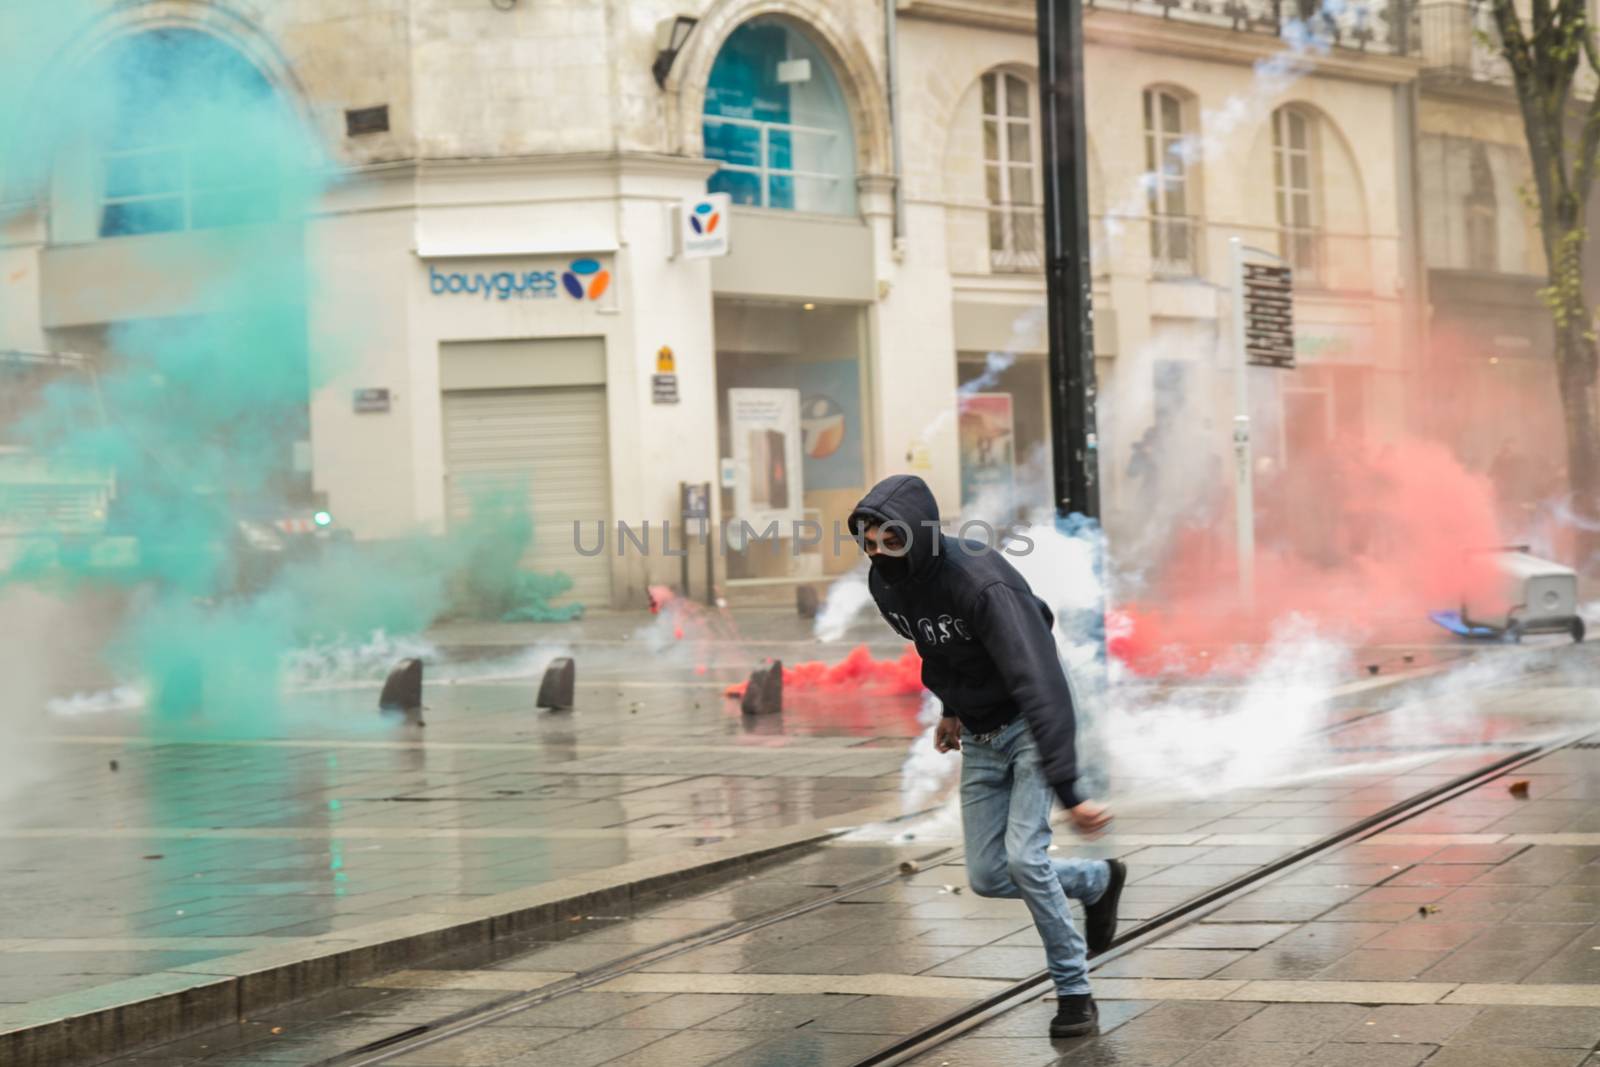 FRANCE, Nantes: A protesters runs during a demonstration on April 9, 2016 in Nantes, western France, against the French government's proposed labour law reforms. Fresh strikes by unions and students are being held across France against proposed reforms to France's labour laws, heaping pressure on President Francois Hollande who suffered a major defeat over constitutional reforms on March 30. 